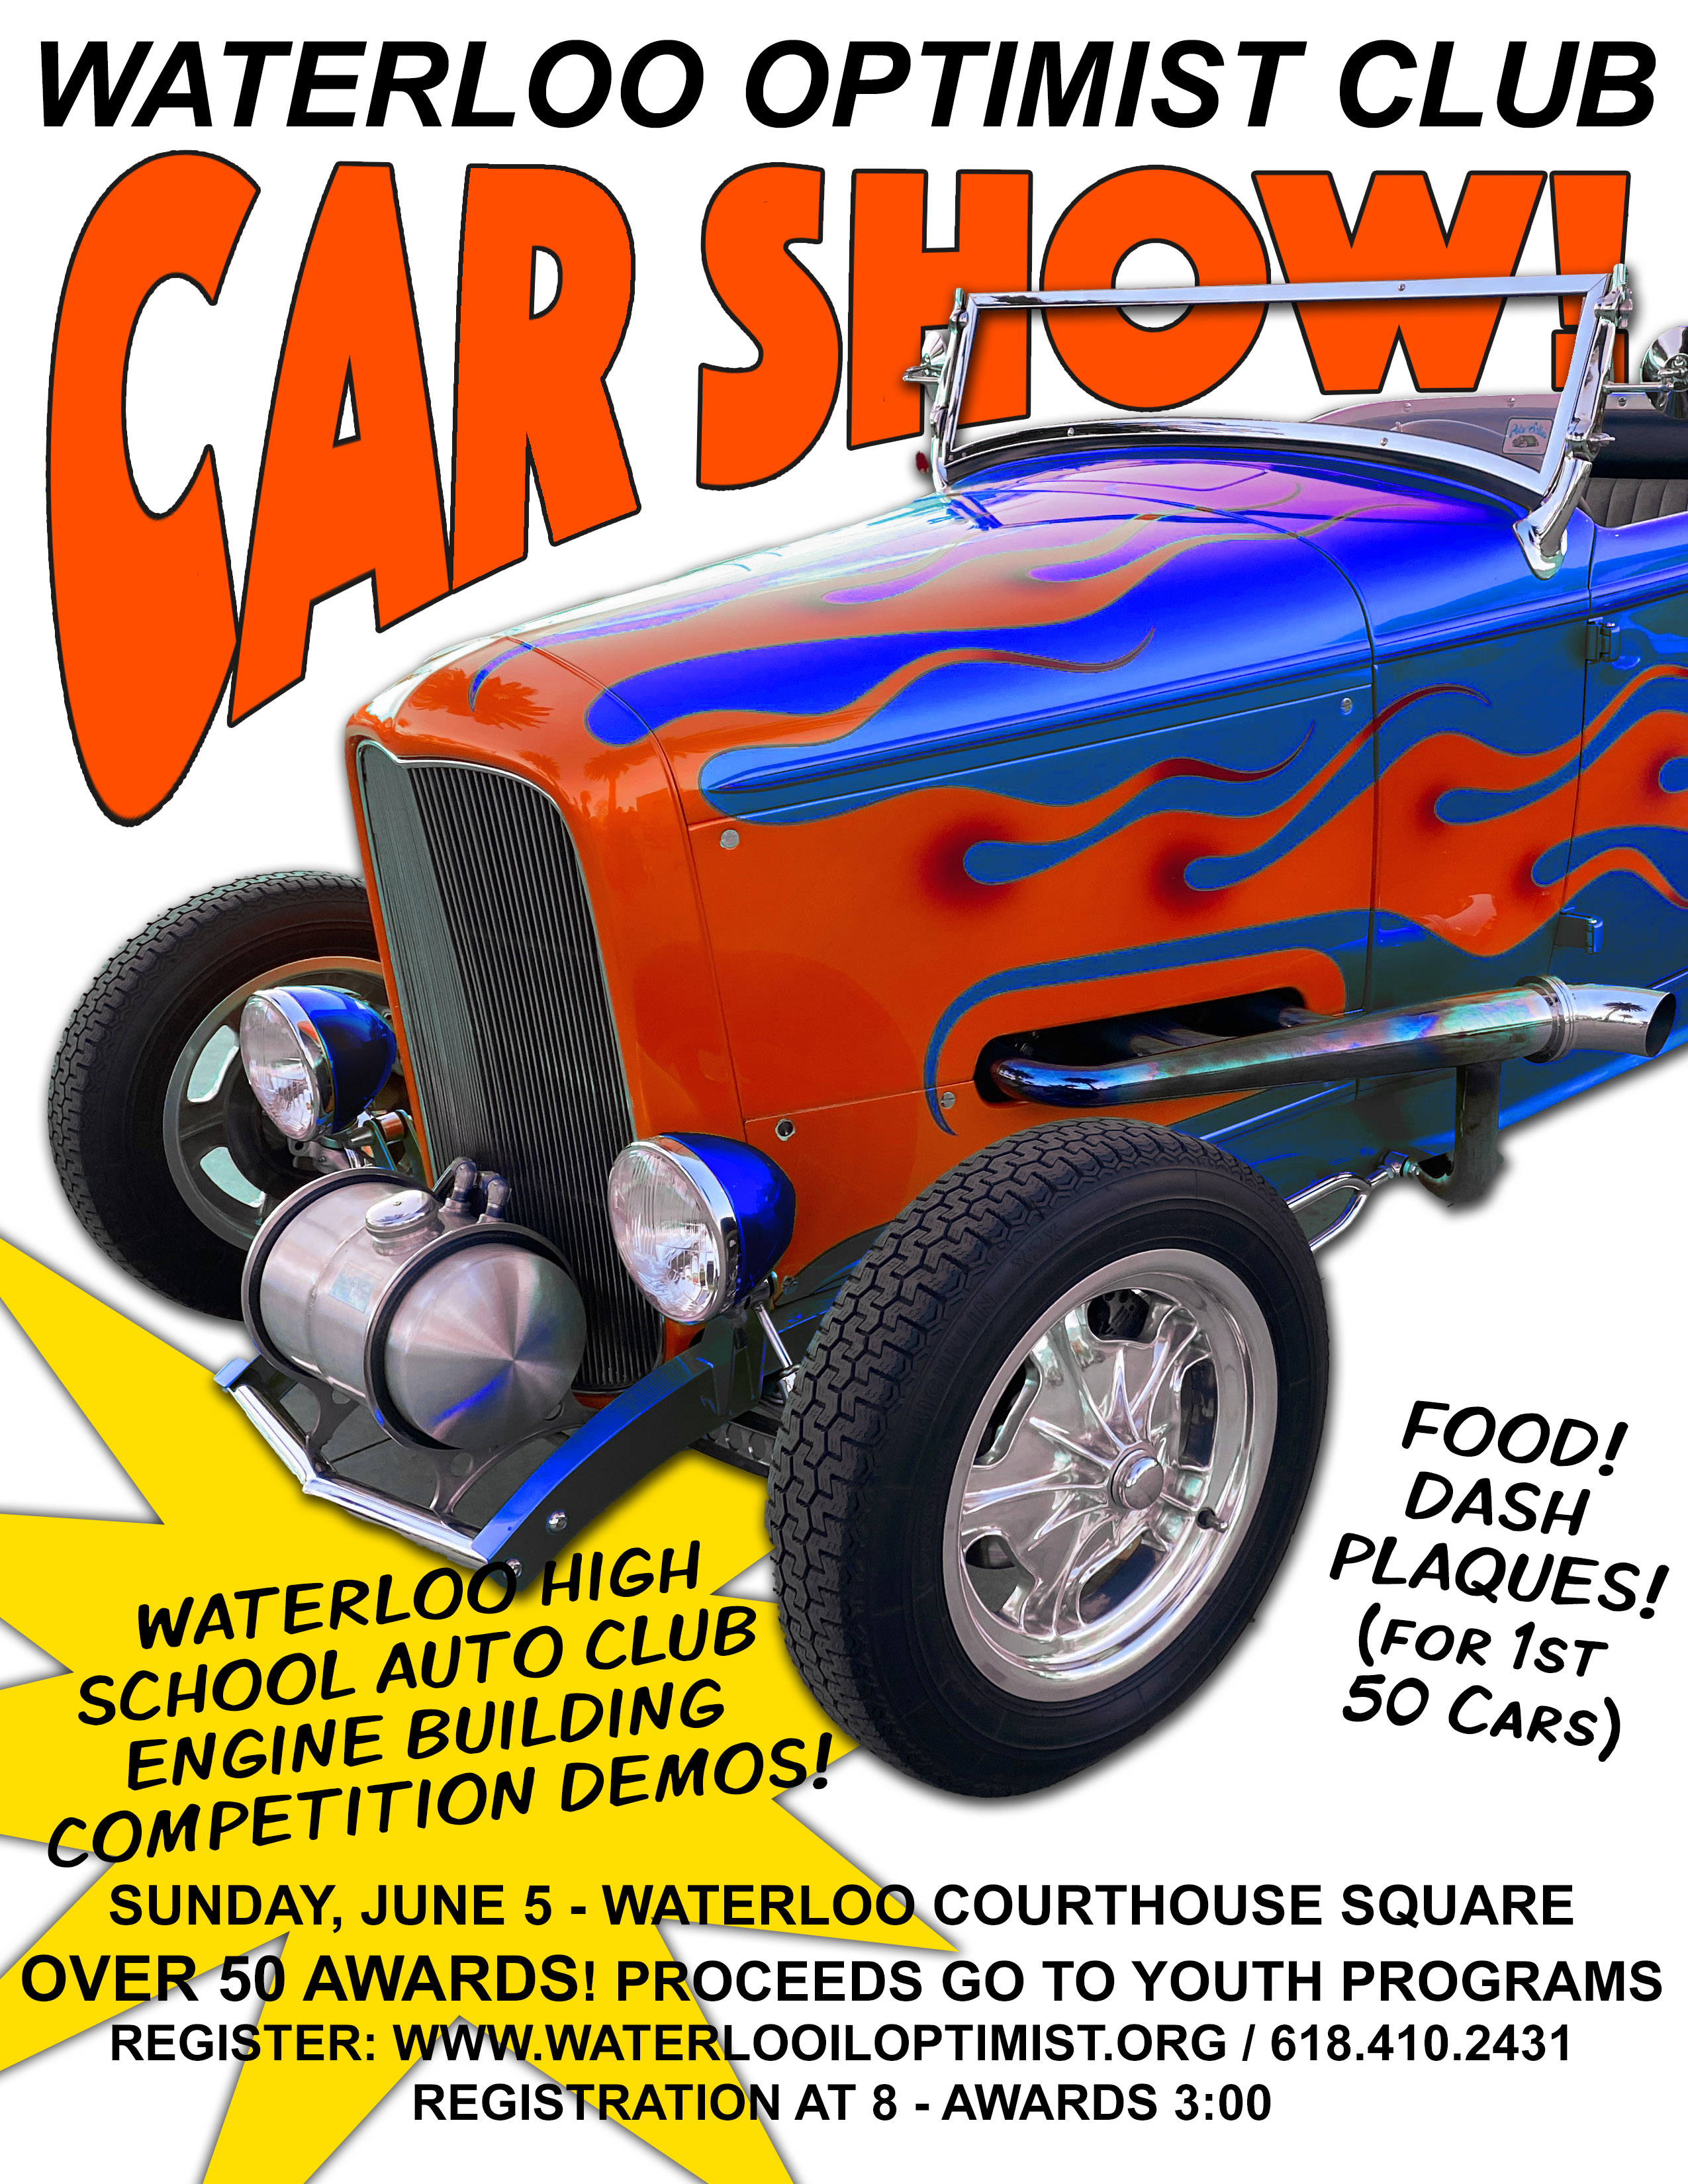 2019 Waterloo, IL Optimist Club Car Show - Sunday, June 2, 2019 Details And Registration Form